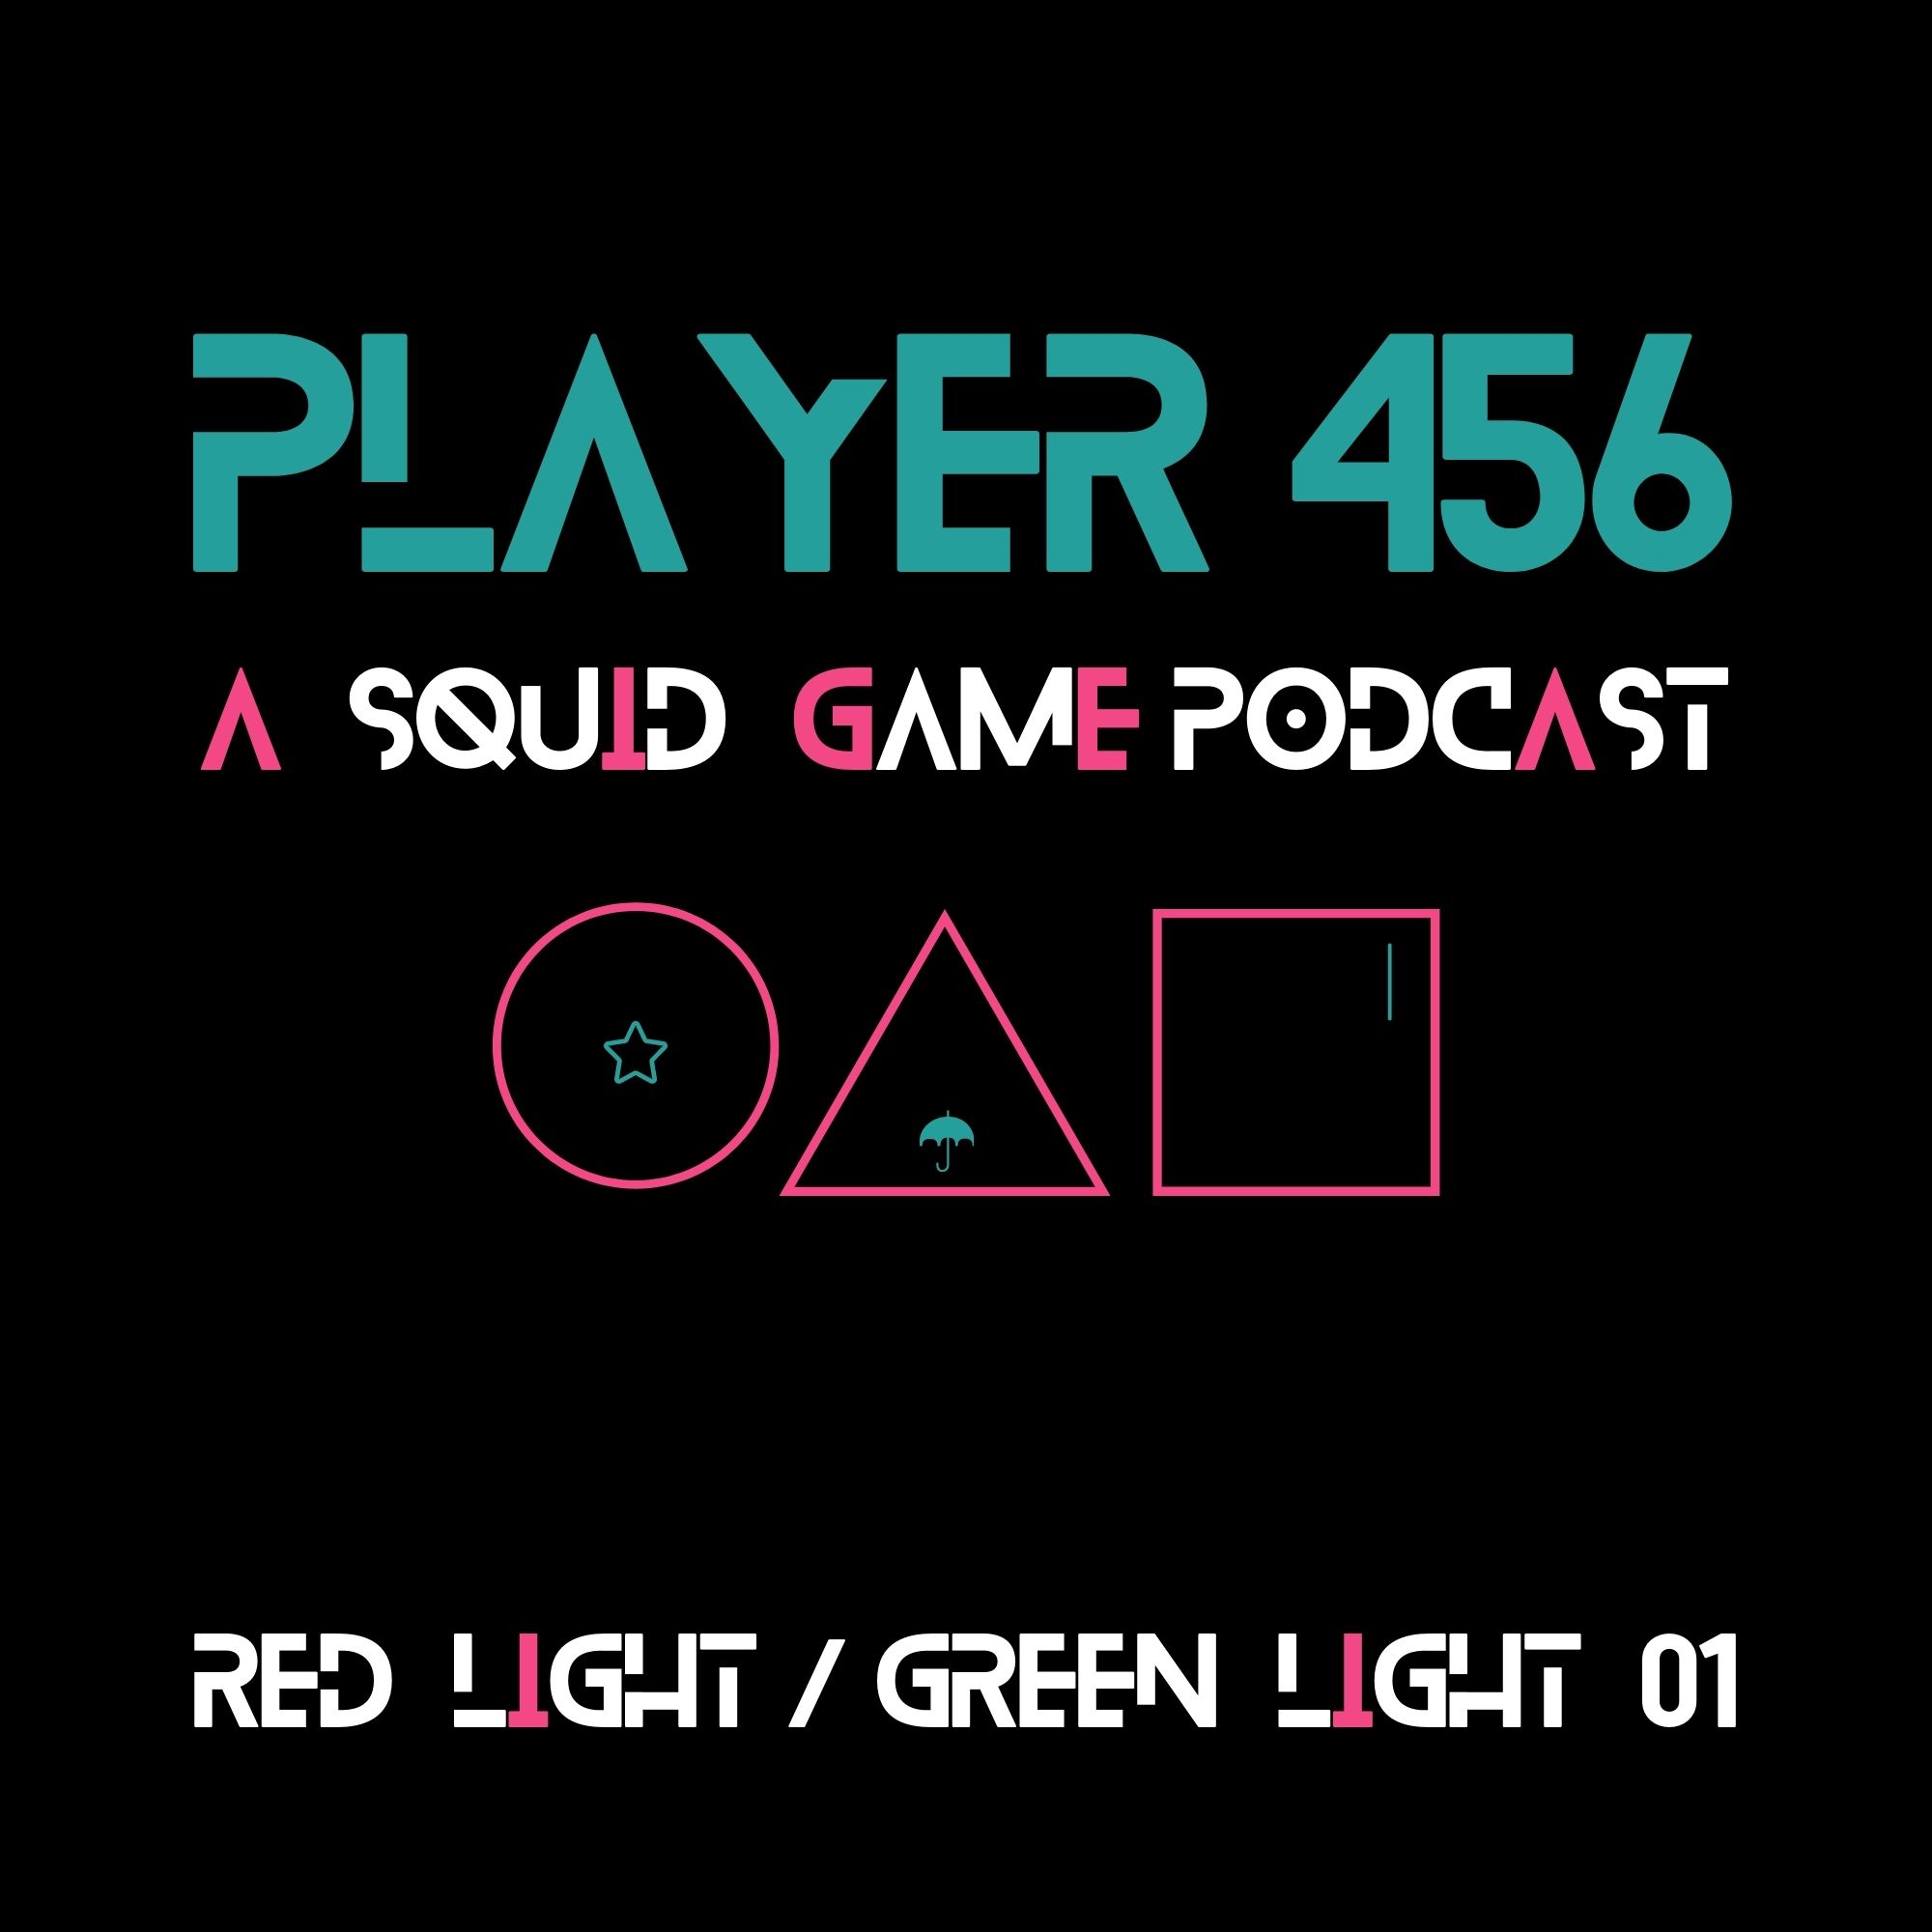 Artwork for podcast Player 456: A Squid Game Podcast